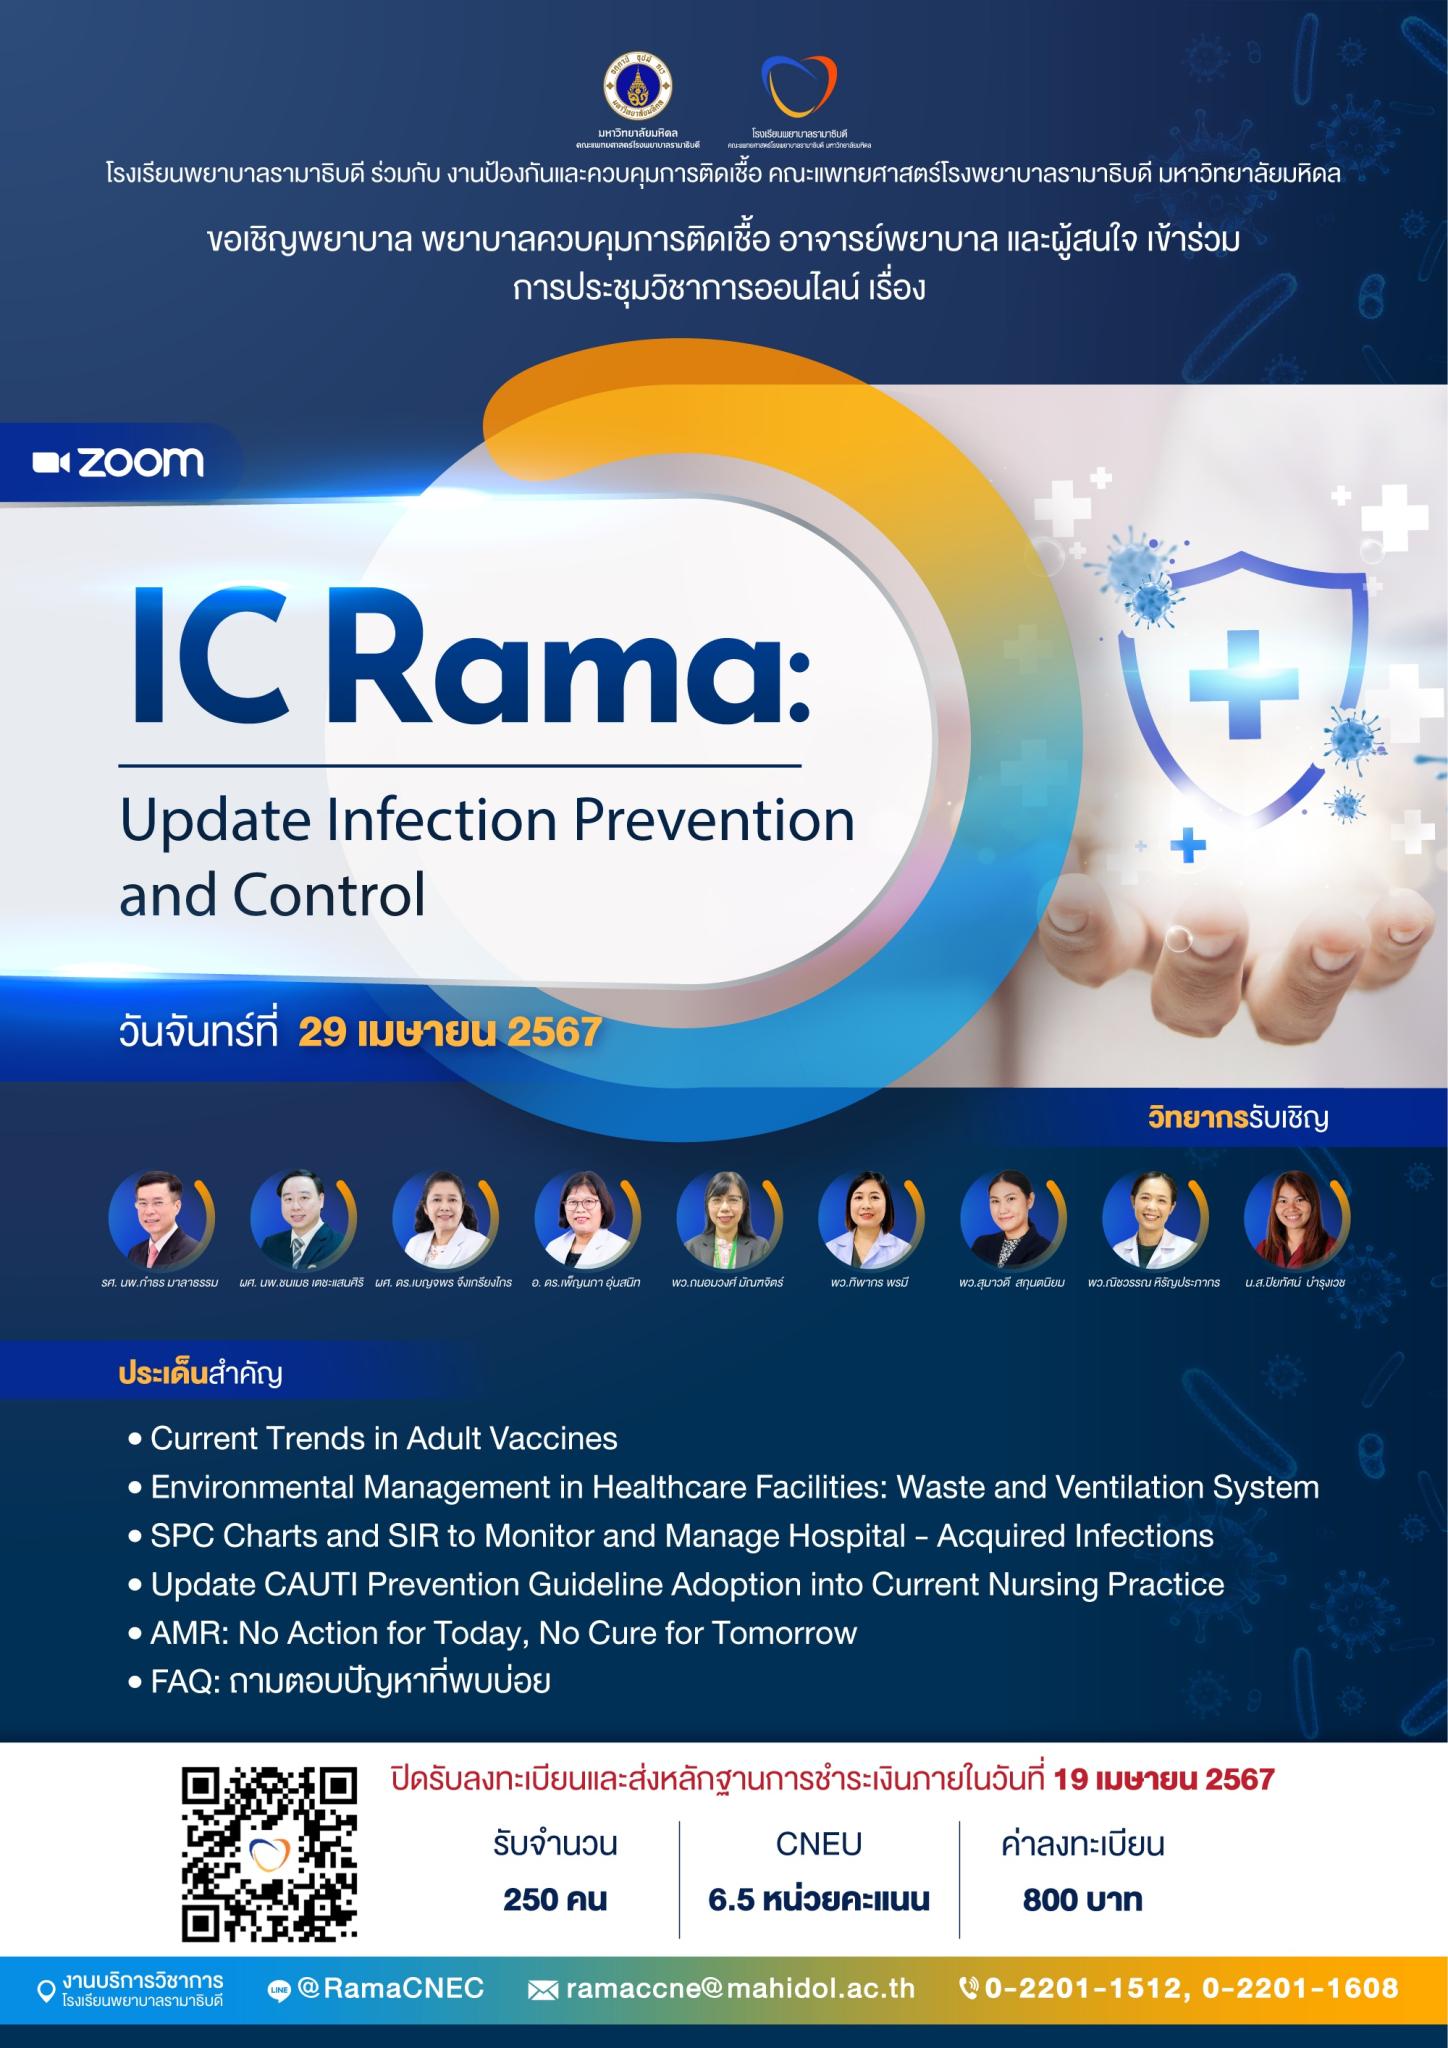 IC Rama: Update Infection Prevention and Control